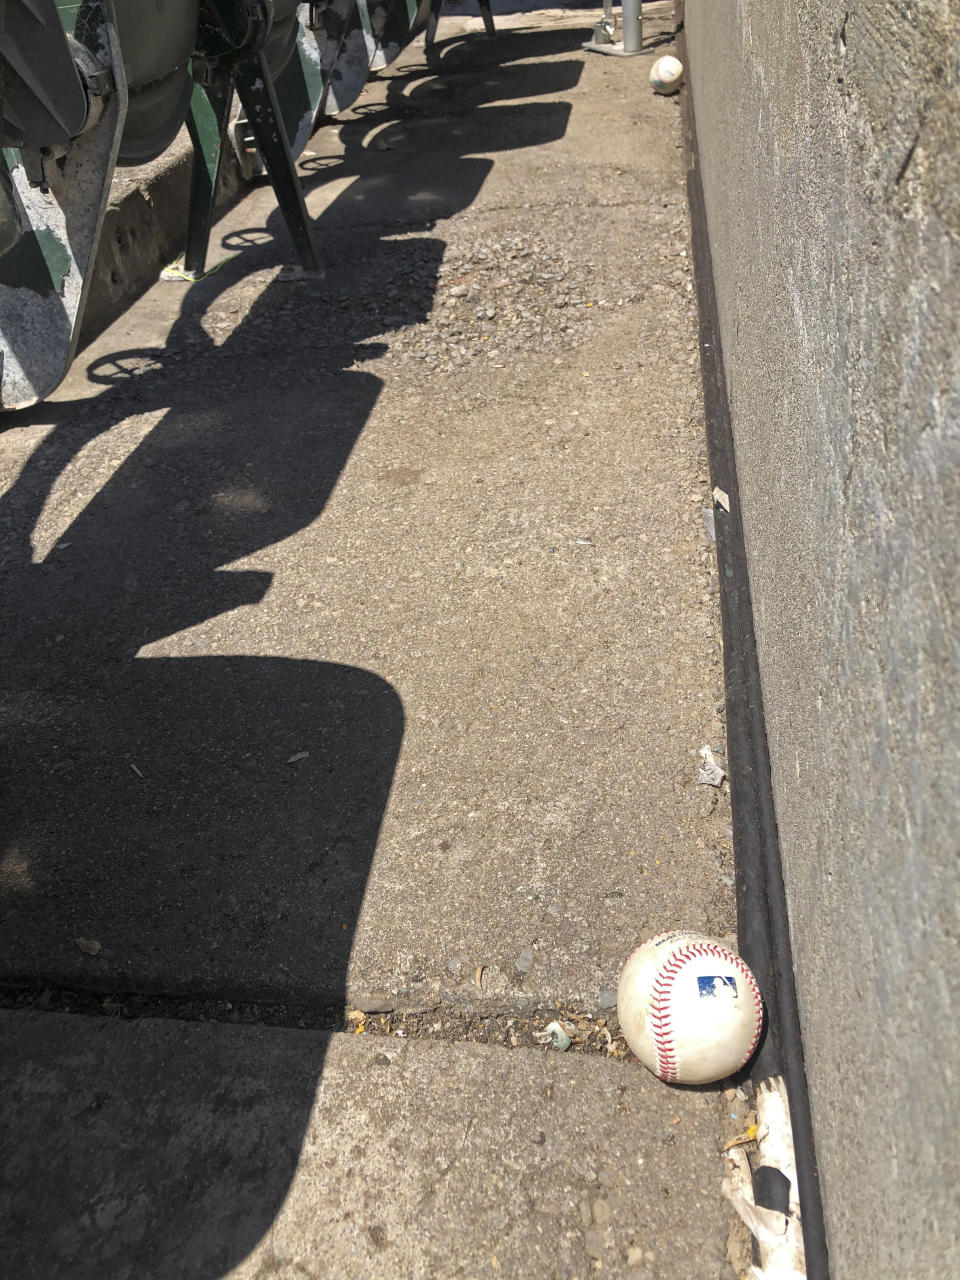 Baseballs fouled off by players are seen stopped at the bottom row of the Oakland Coliseum after rolling down through empty stands during the baseball game between the Los Angeles Angels and the Oakland Athletics on Monday, July 27, 2020, in Oakland, Calif. (AP Photo/Ben Margot)